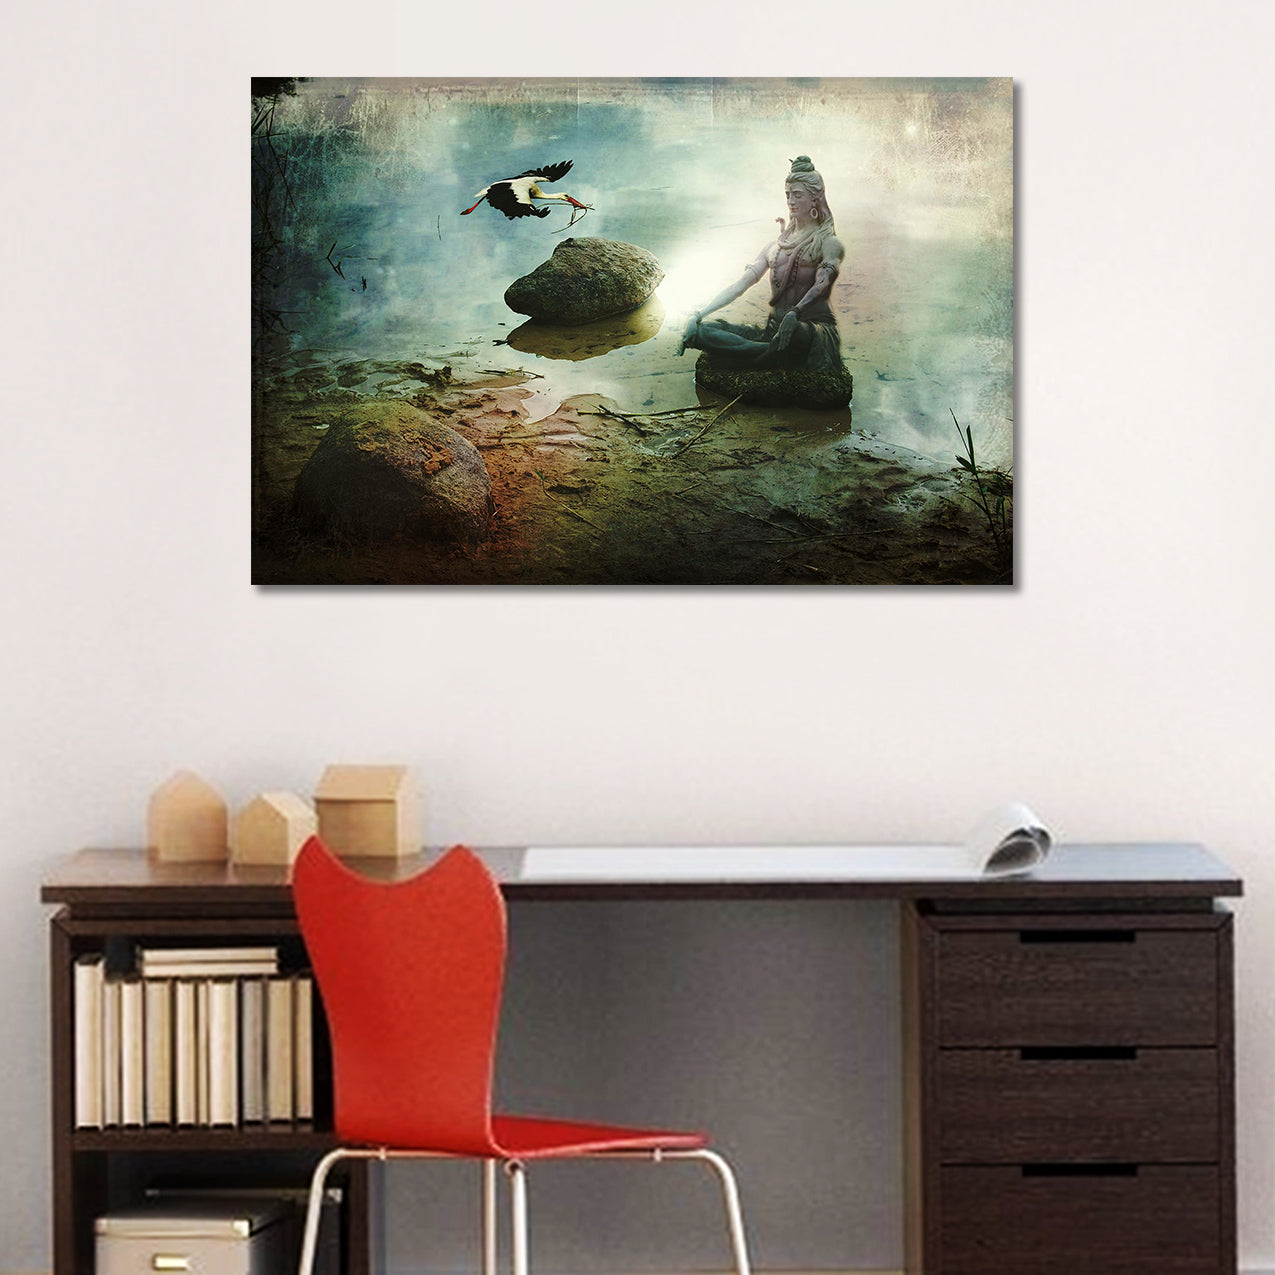 Lord Shiva - Unframed Canvas Painting